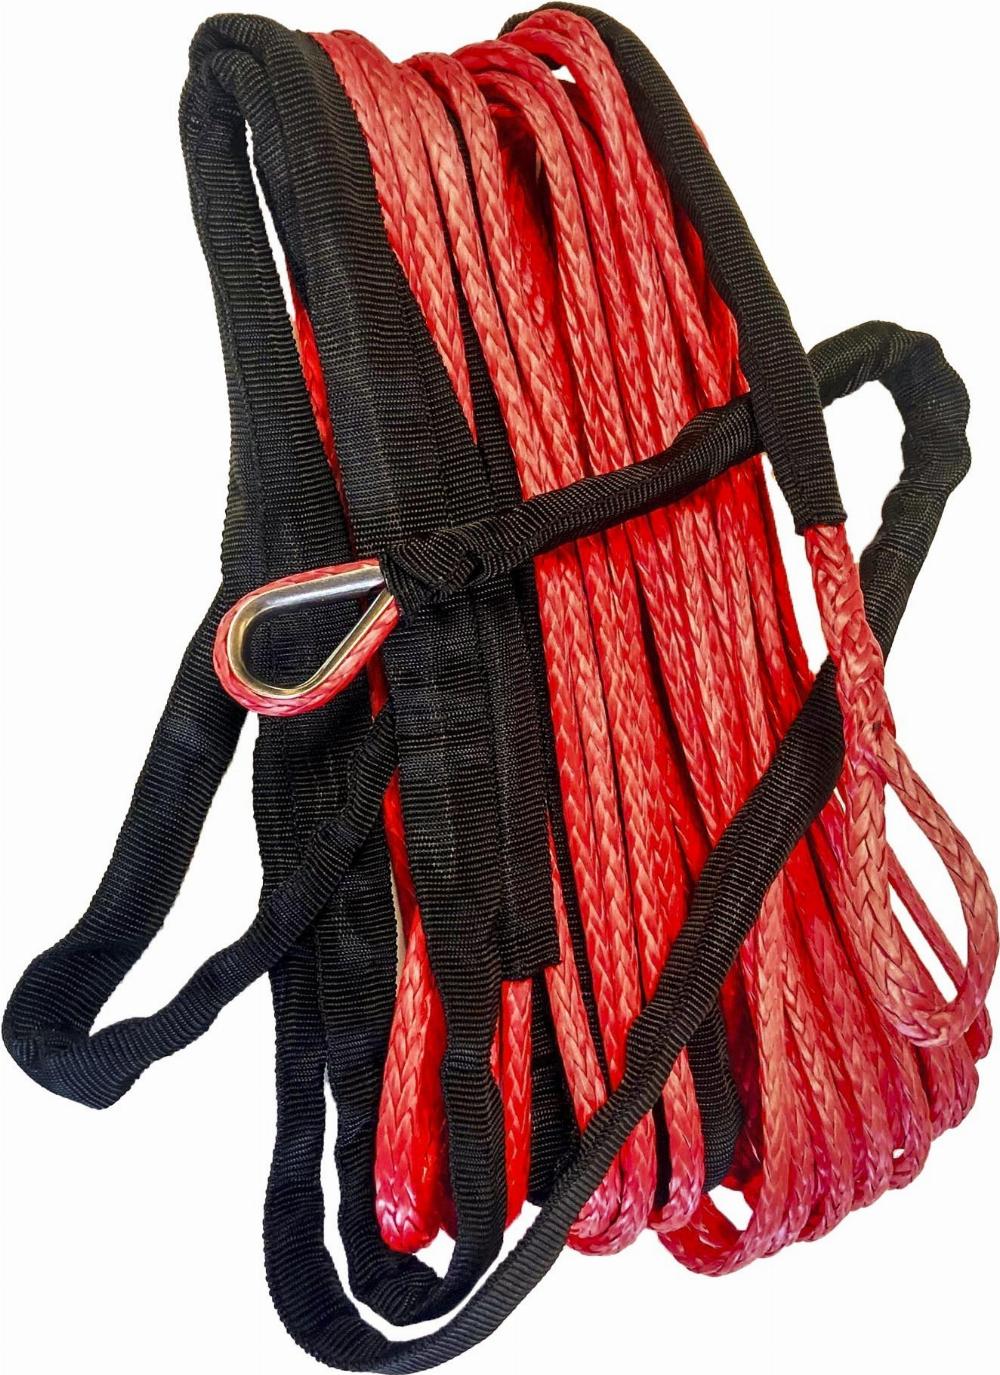 SYNTHETIC WINCH ROPE 3/16" DIAMETER X 50 FT. RED #600-2050